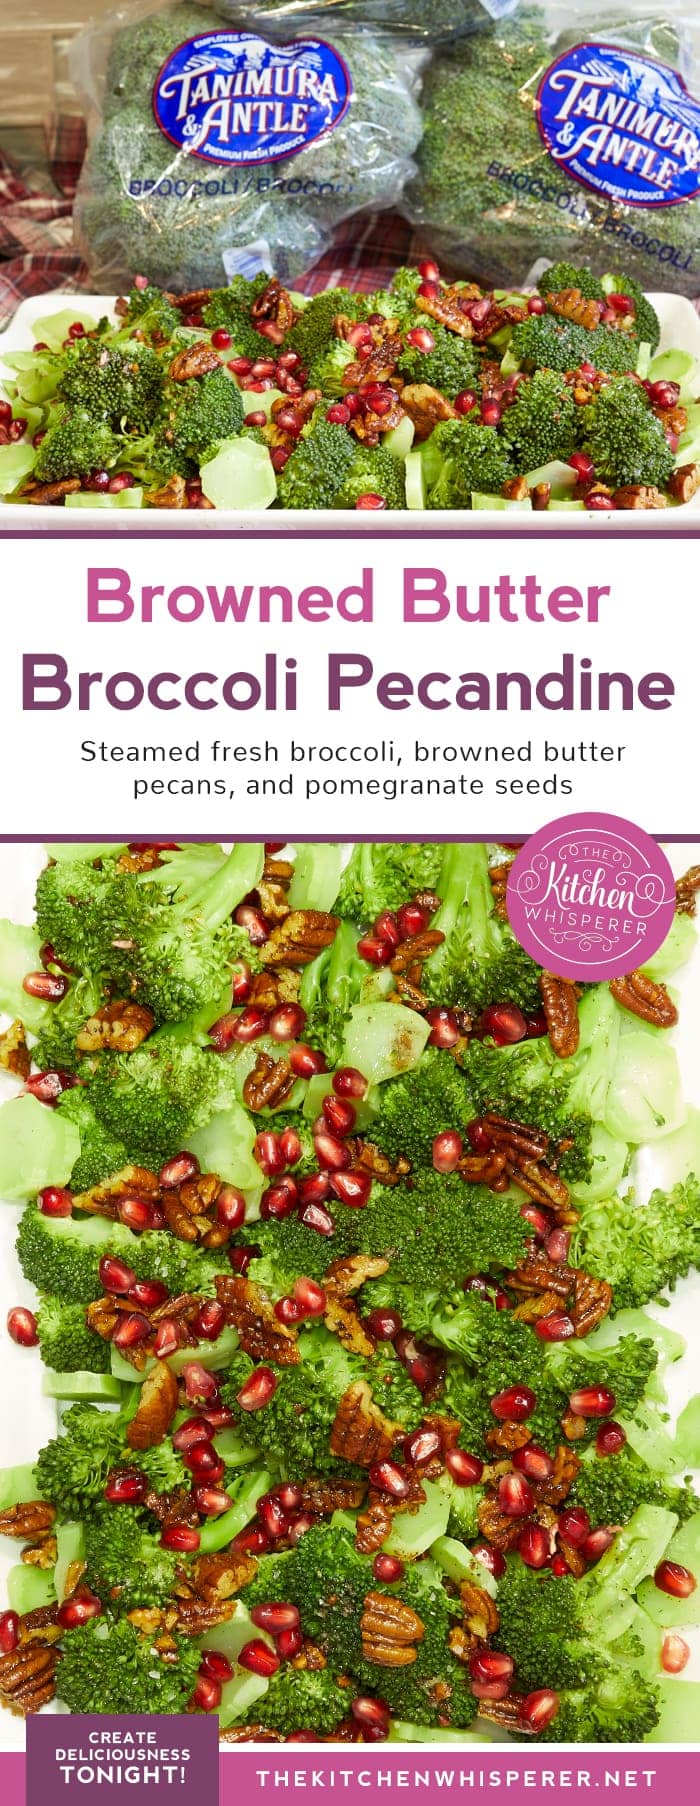 Your new favorite side dish - Browned Butter Broccoli Pecandine!